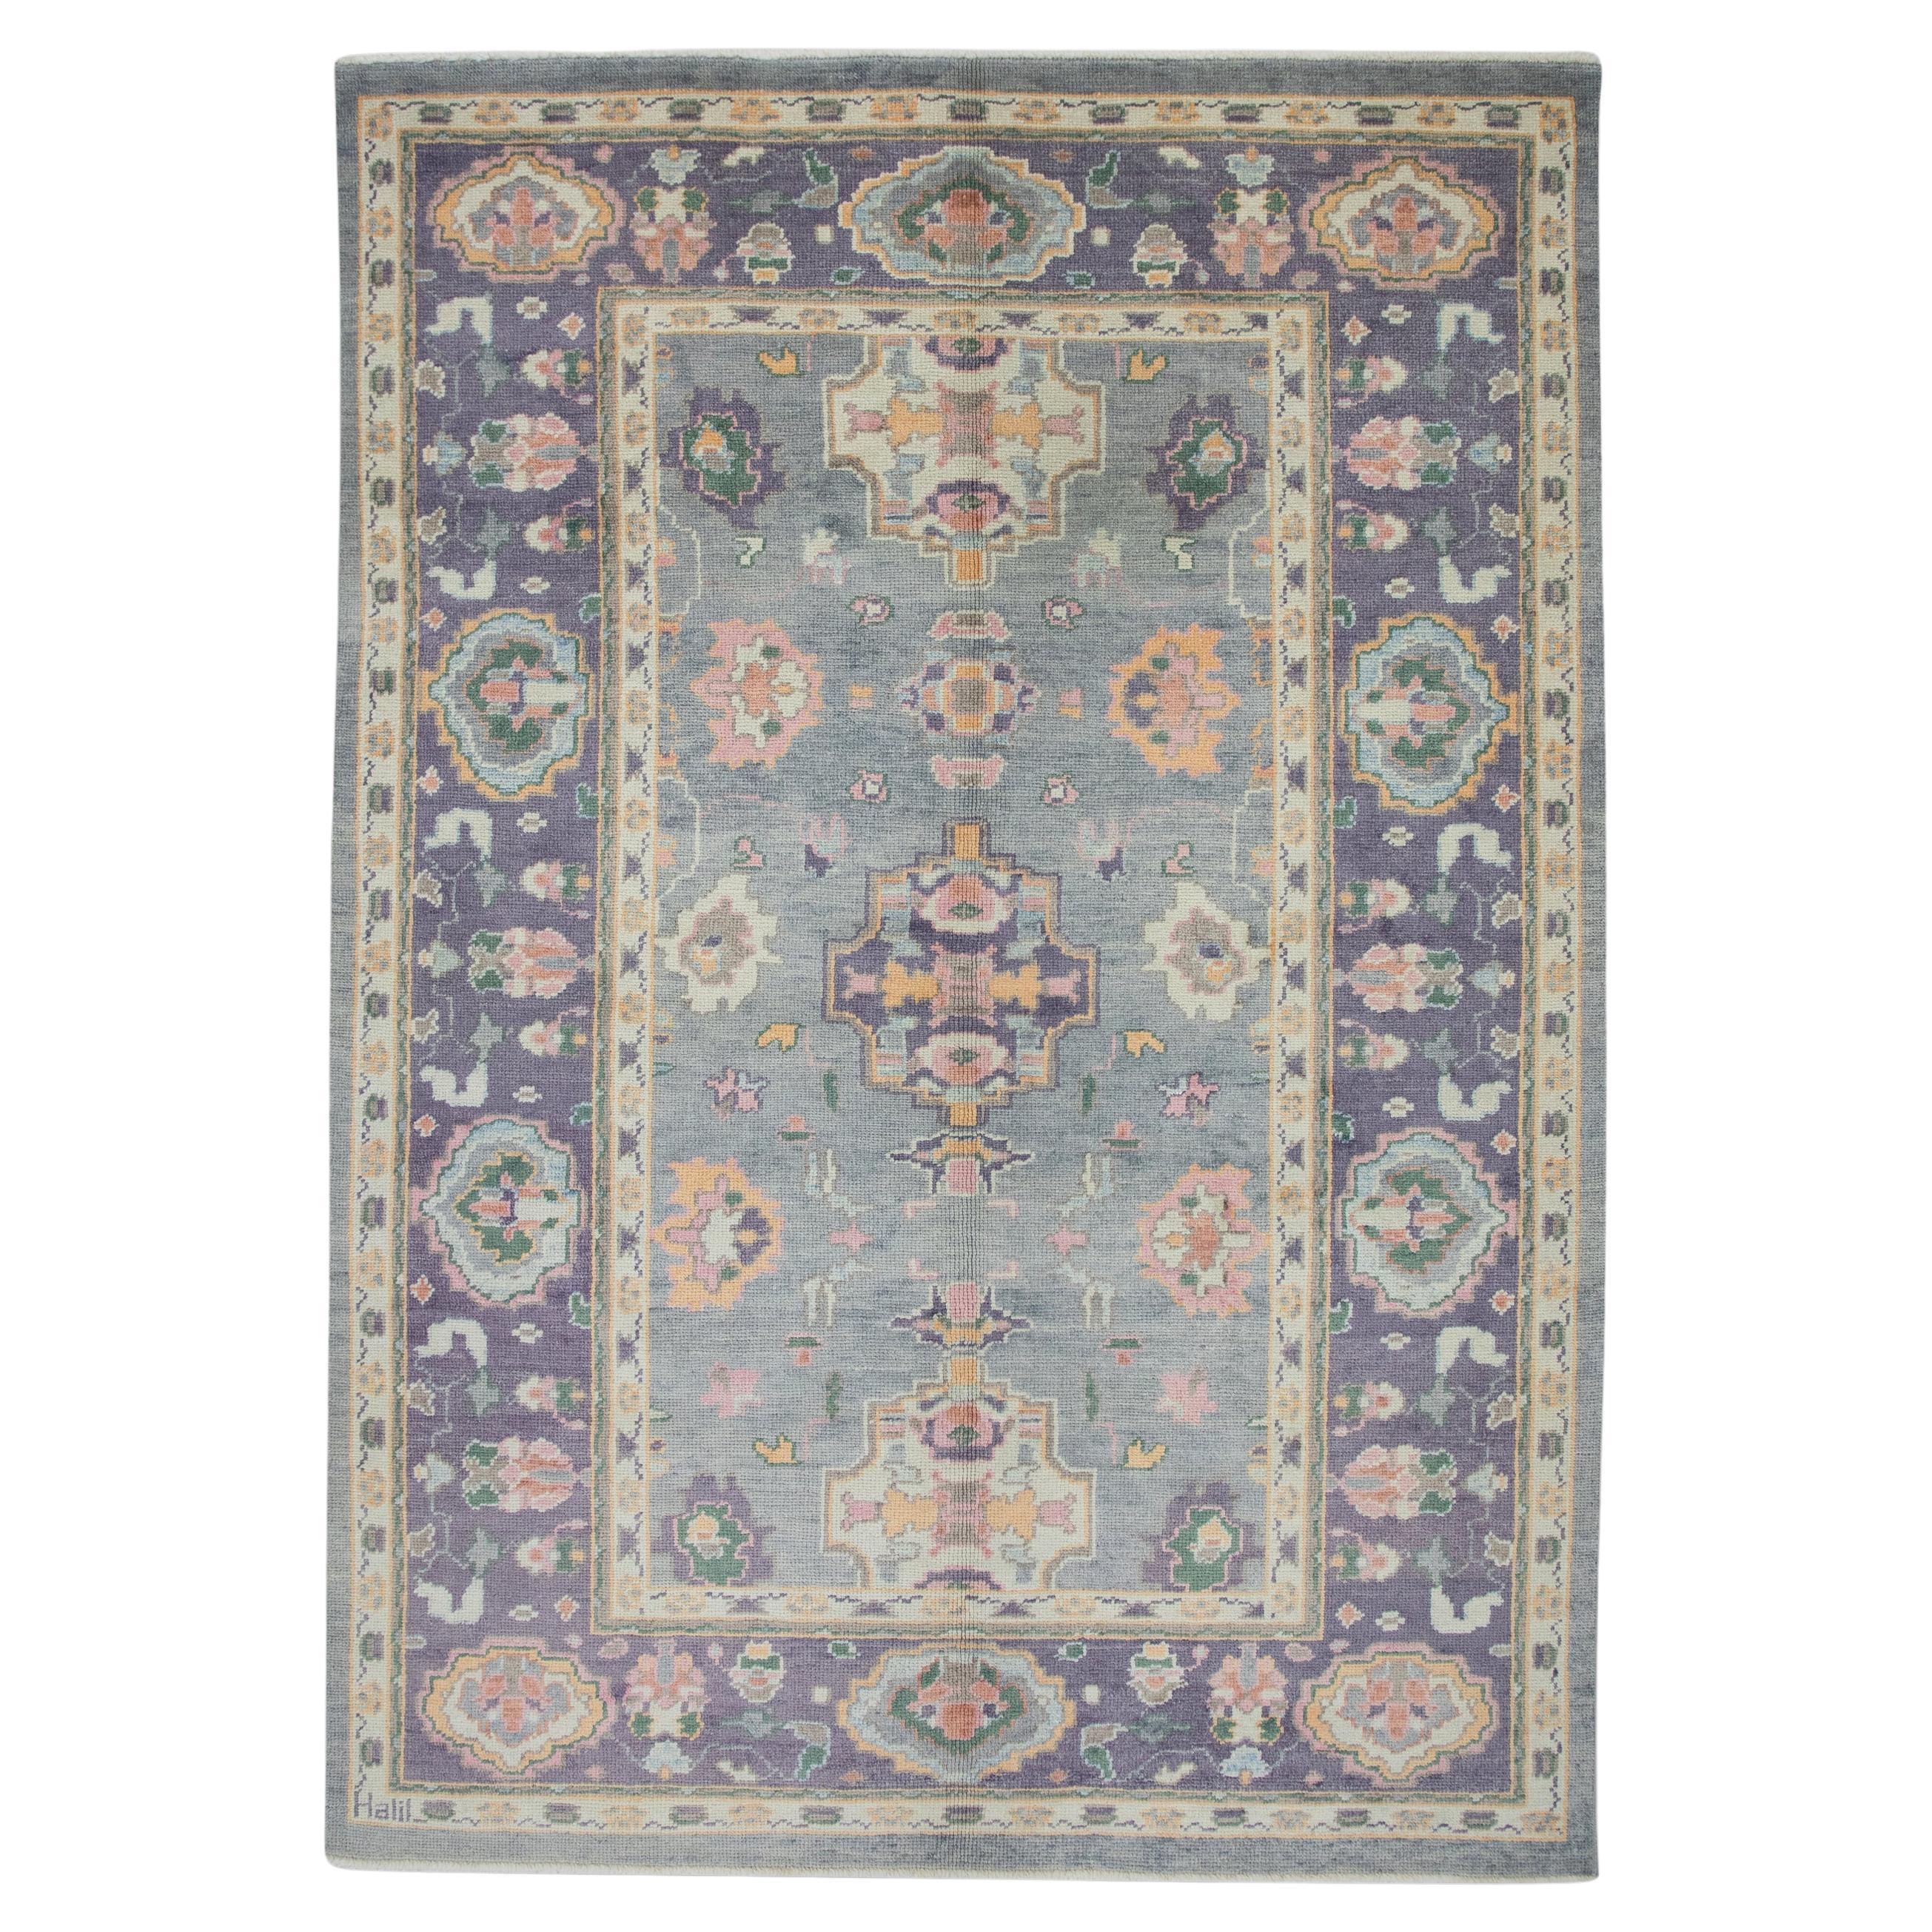 Purple and Pink Floral Design Handwoven Wool Turkish Oushak Rug 6'4" x 9'2" For Sale